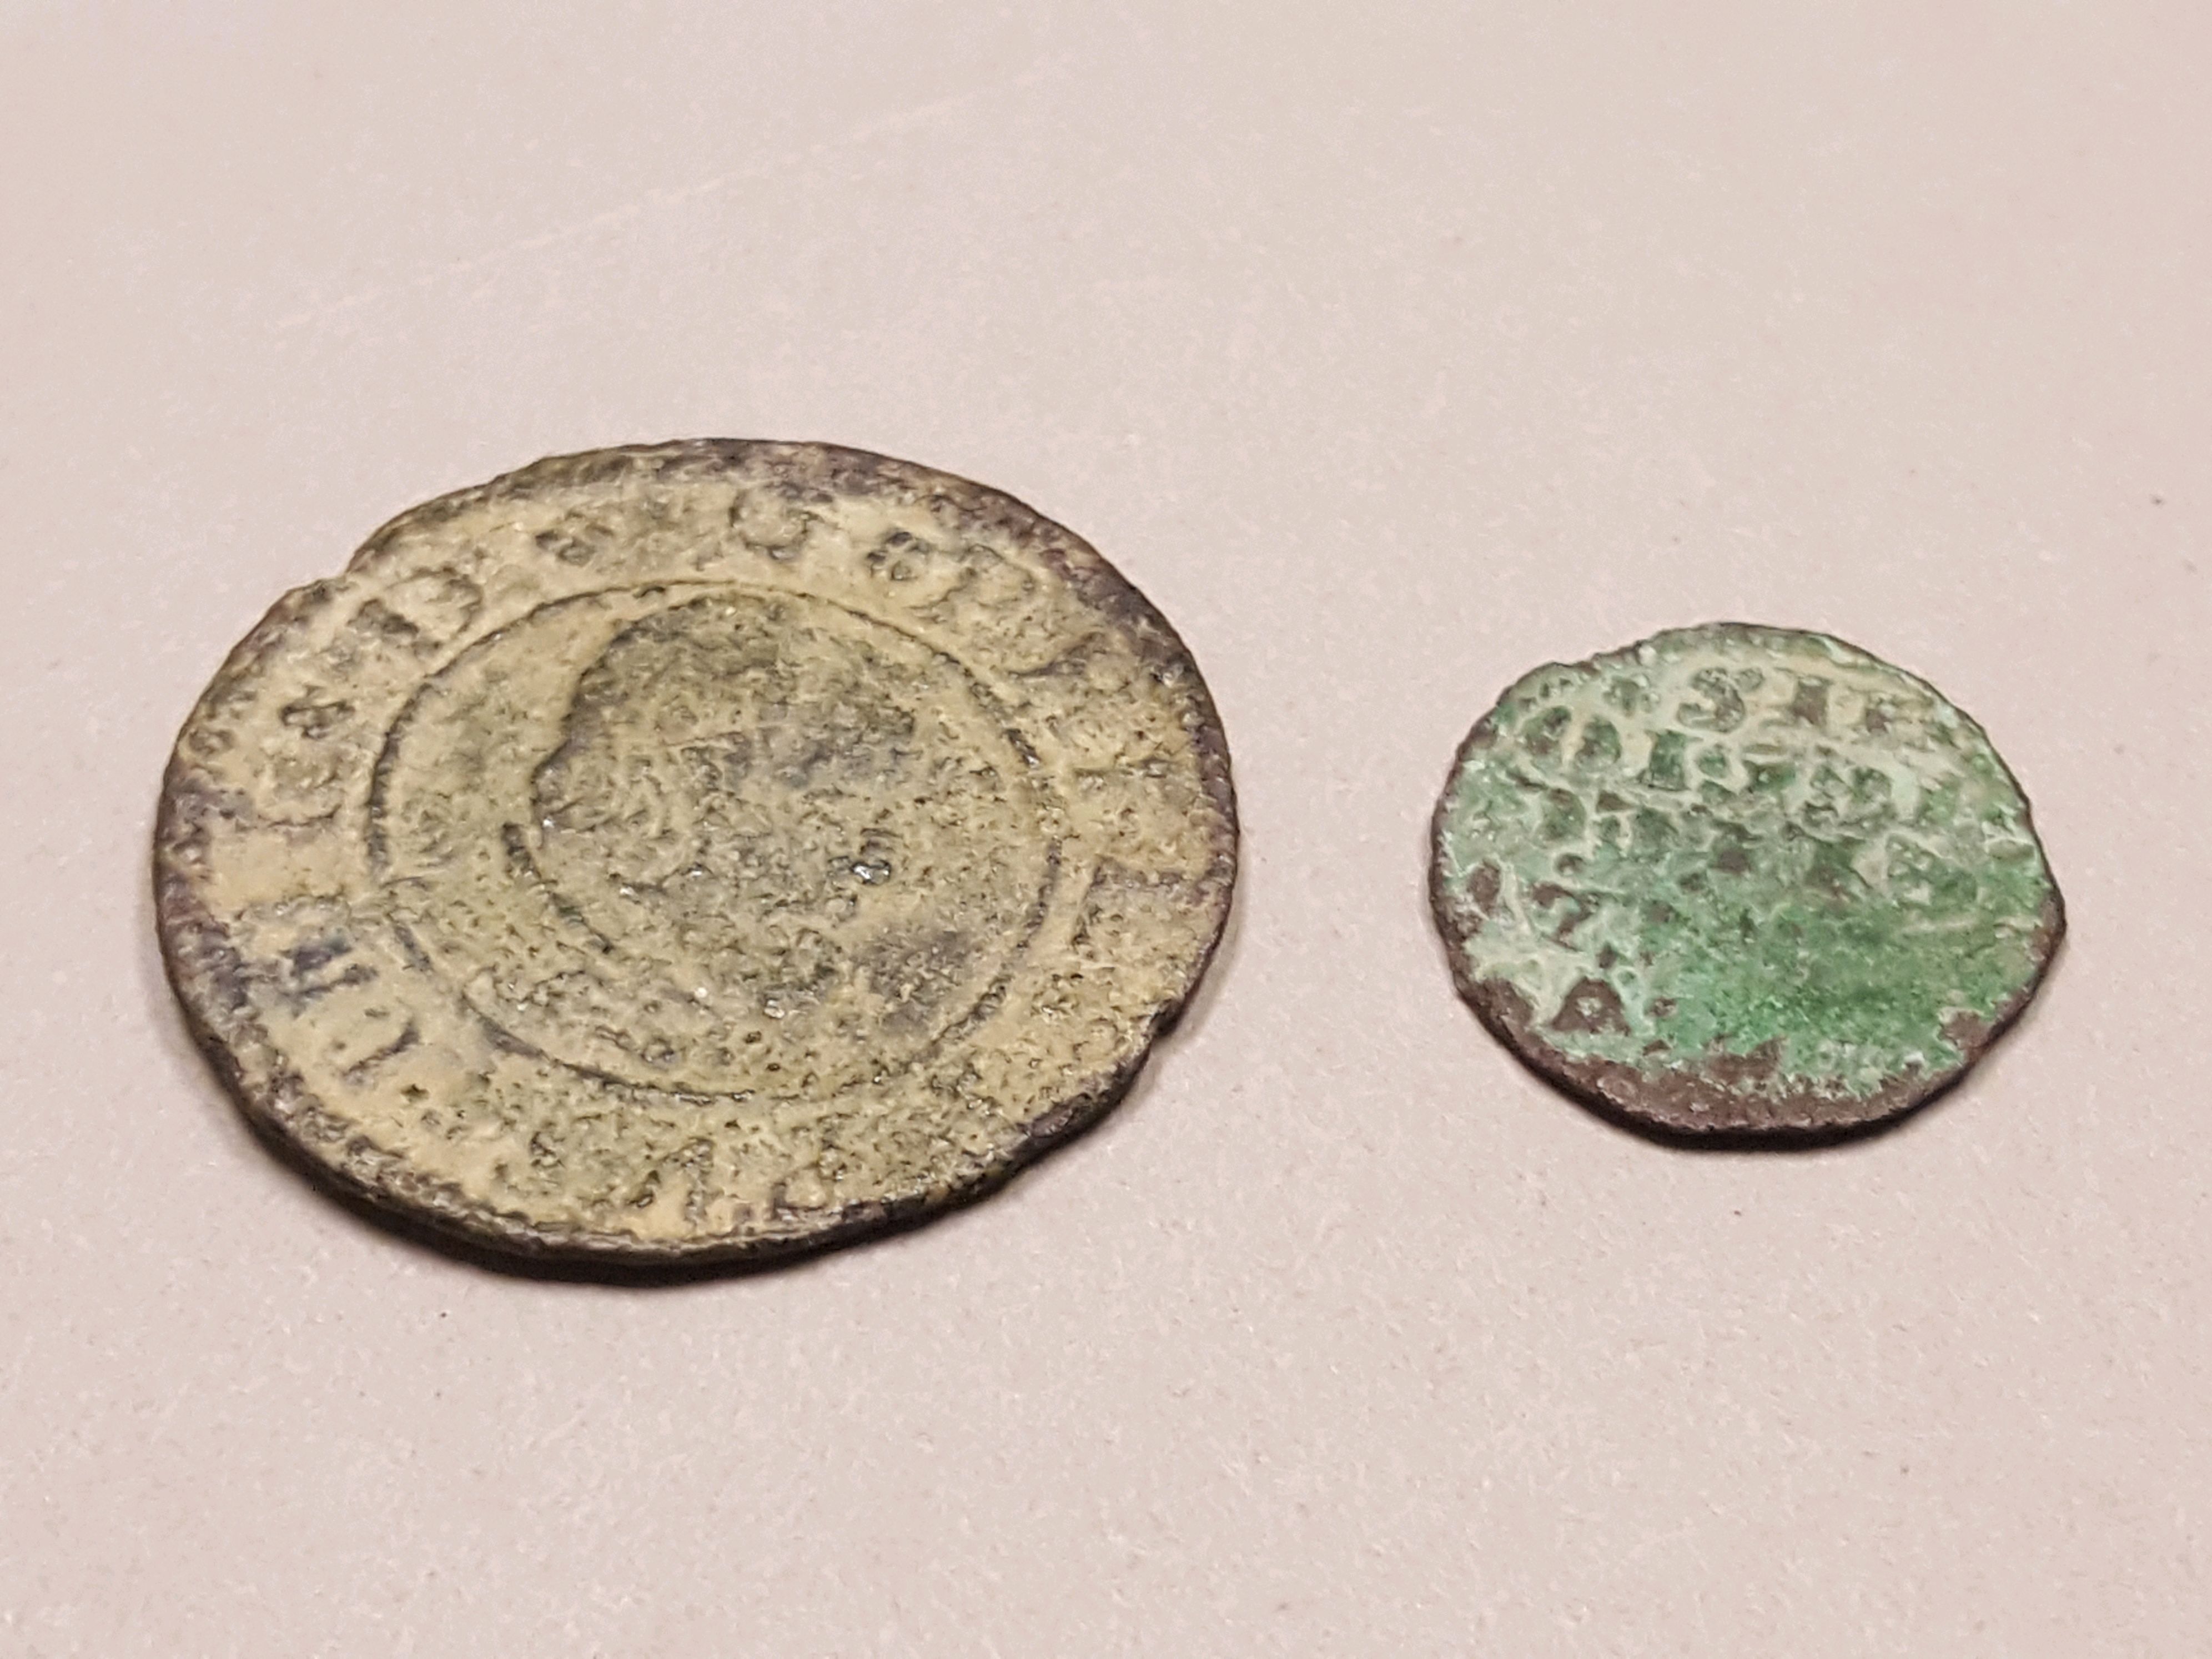 Two ancient looking coins of different sizes